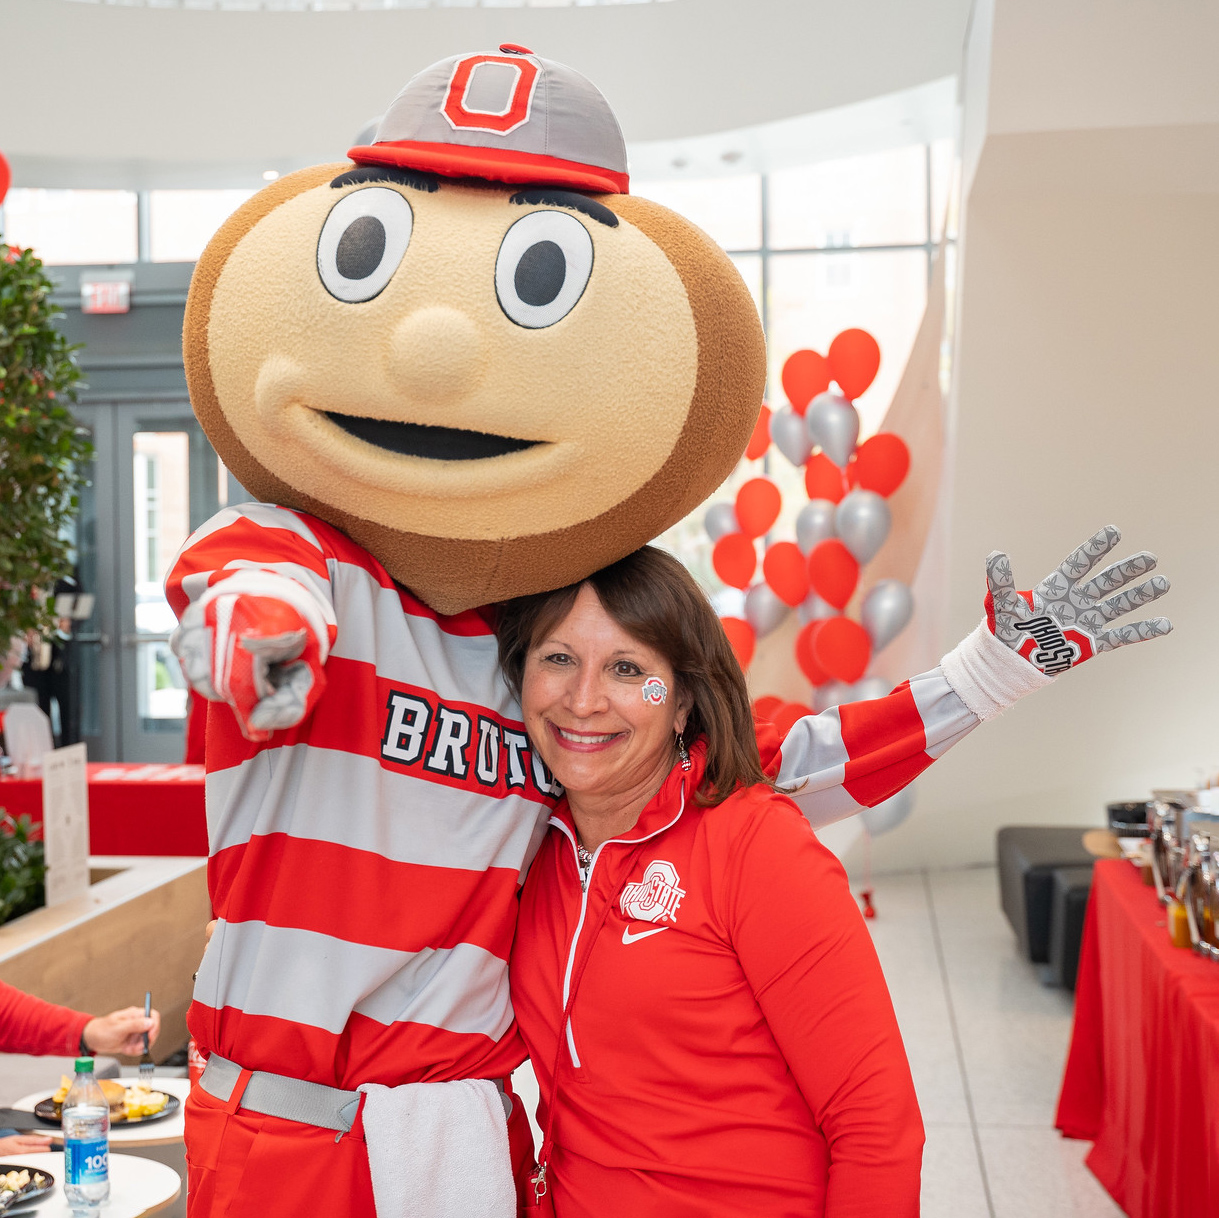 Bern Melnyk poses with Brutus at Homecoming